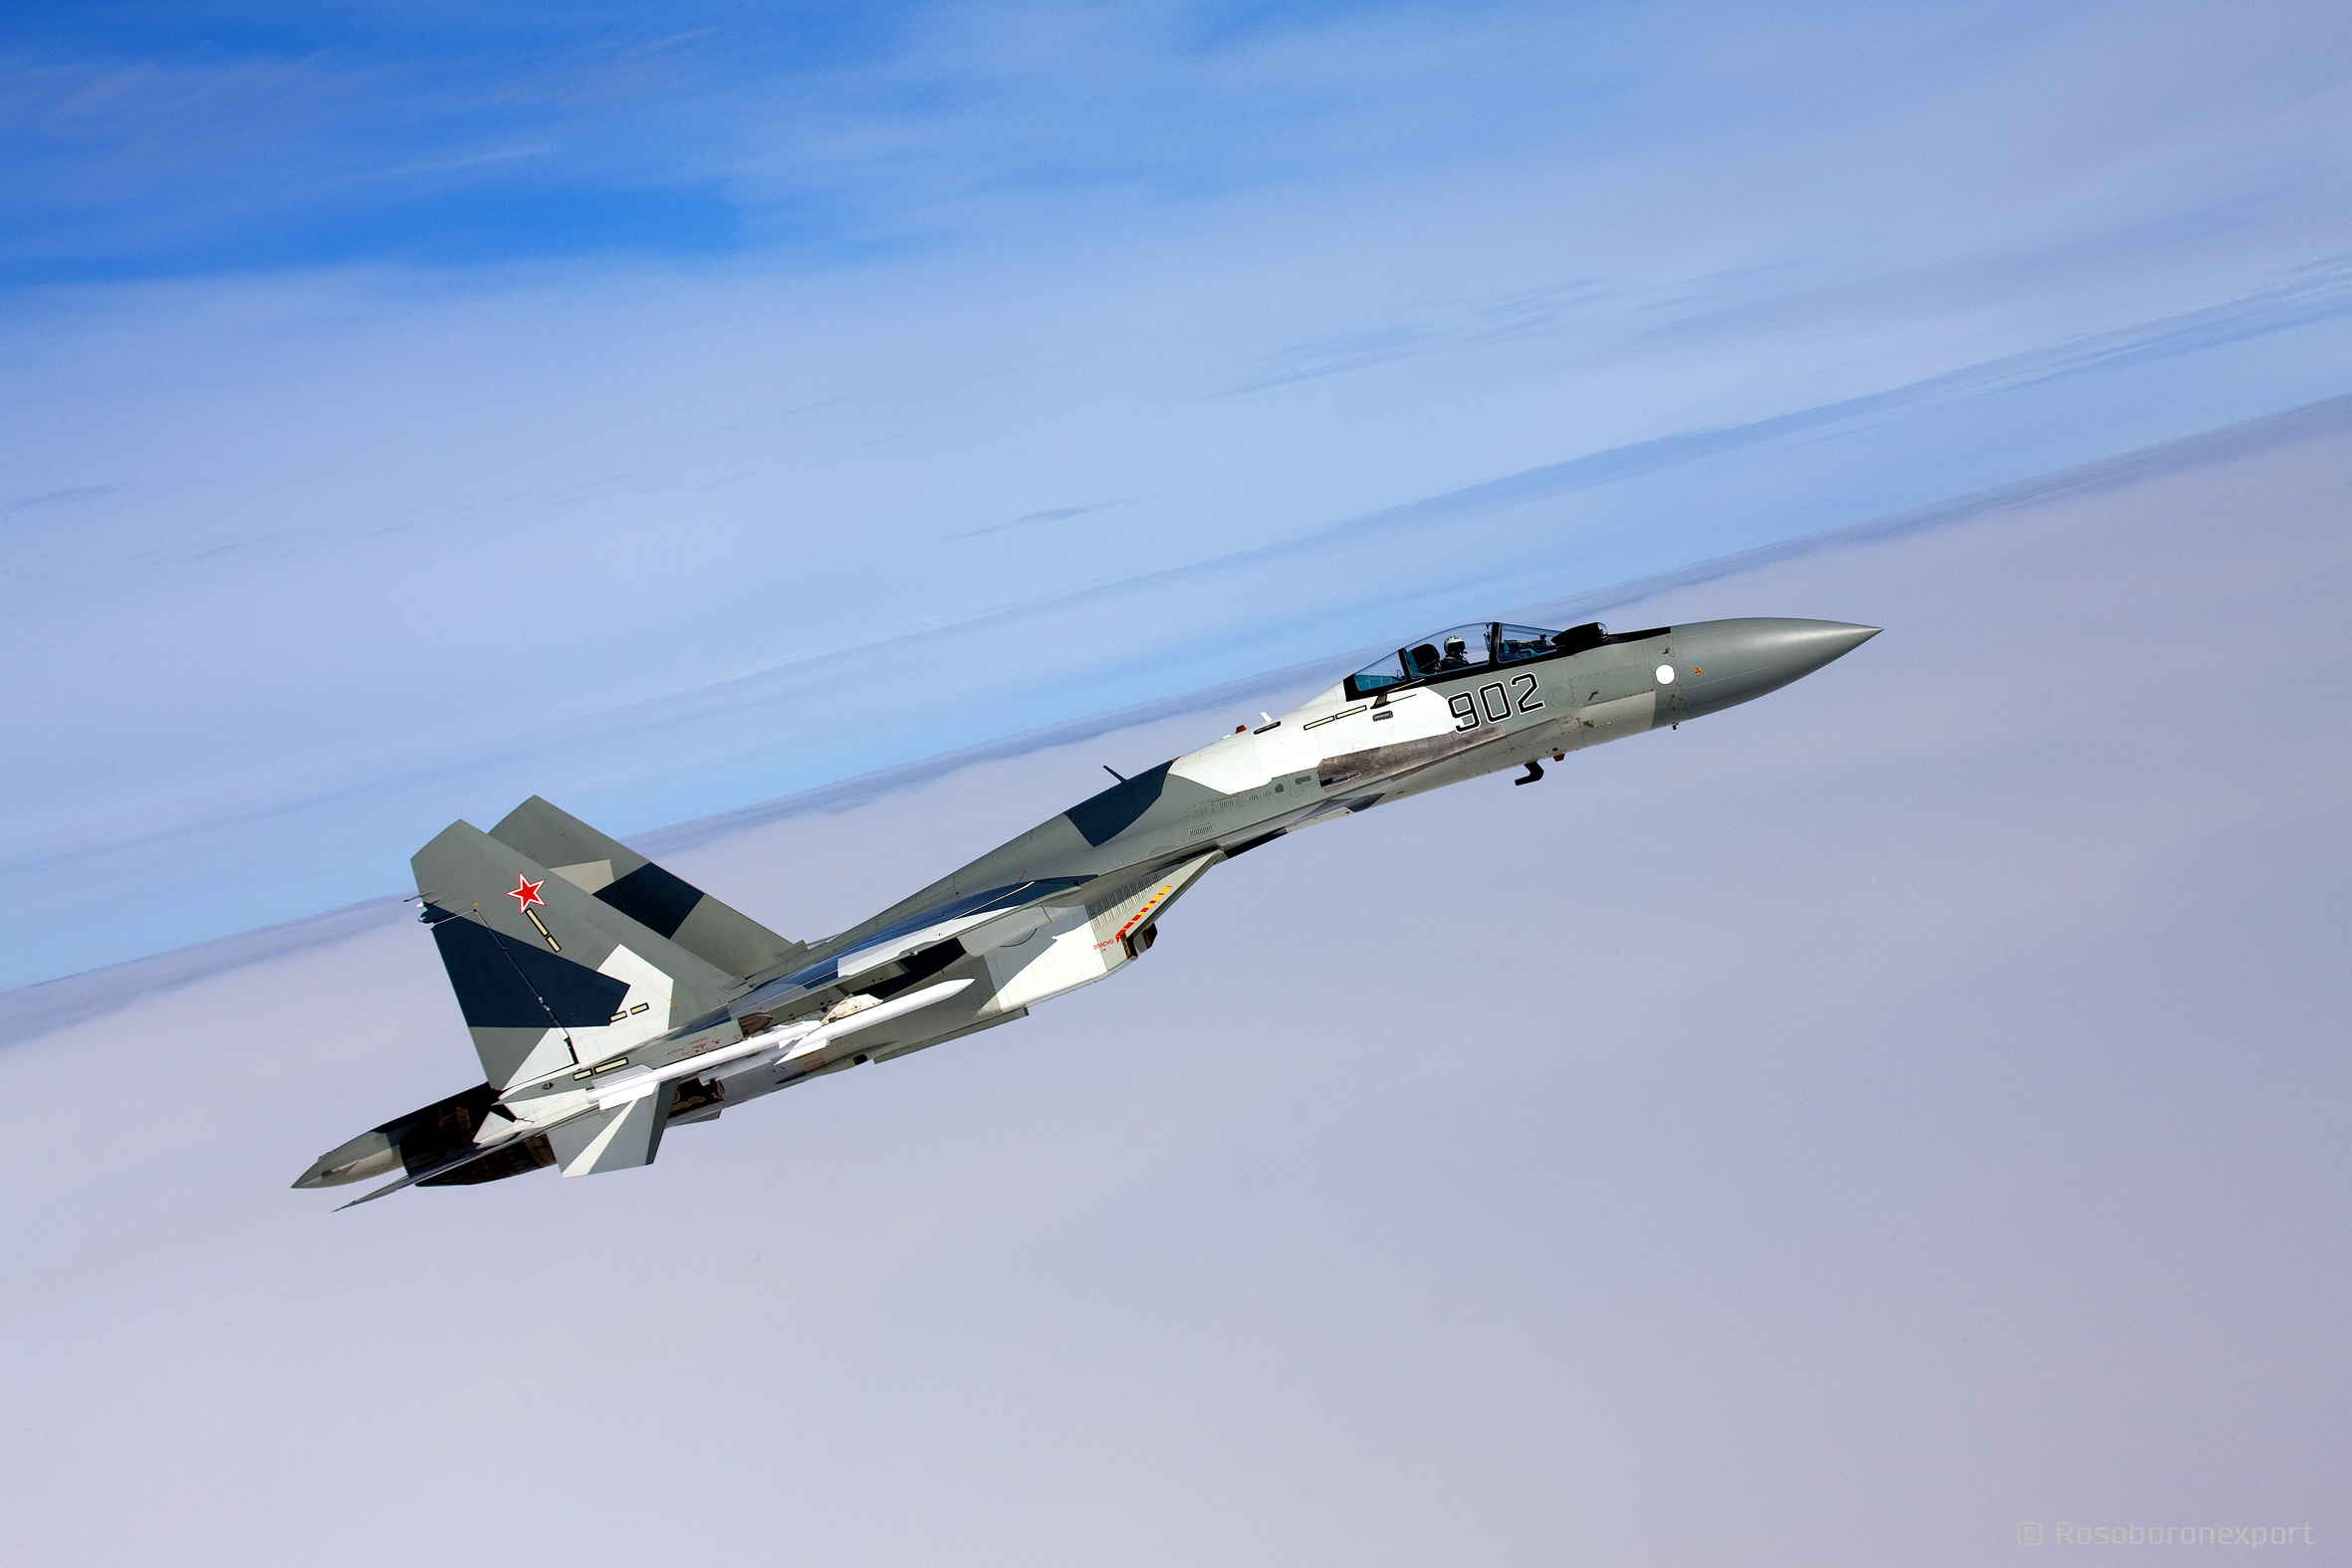 Su-35 Flanker-E Multirole Fighter - Airforce Technology